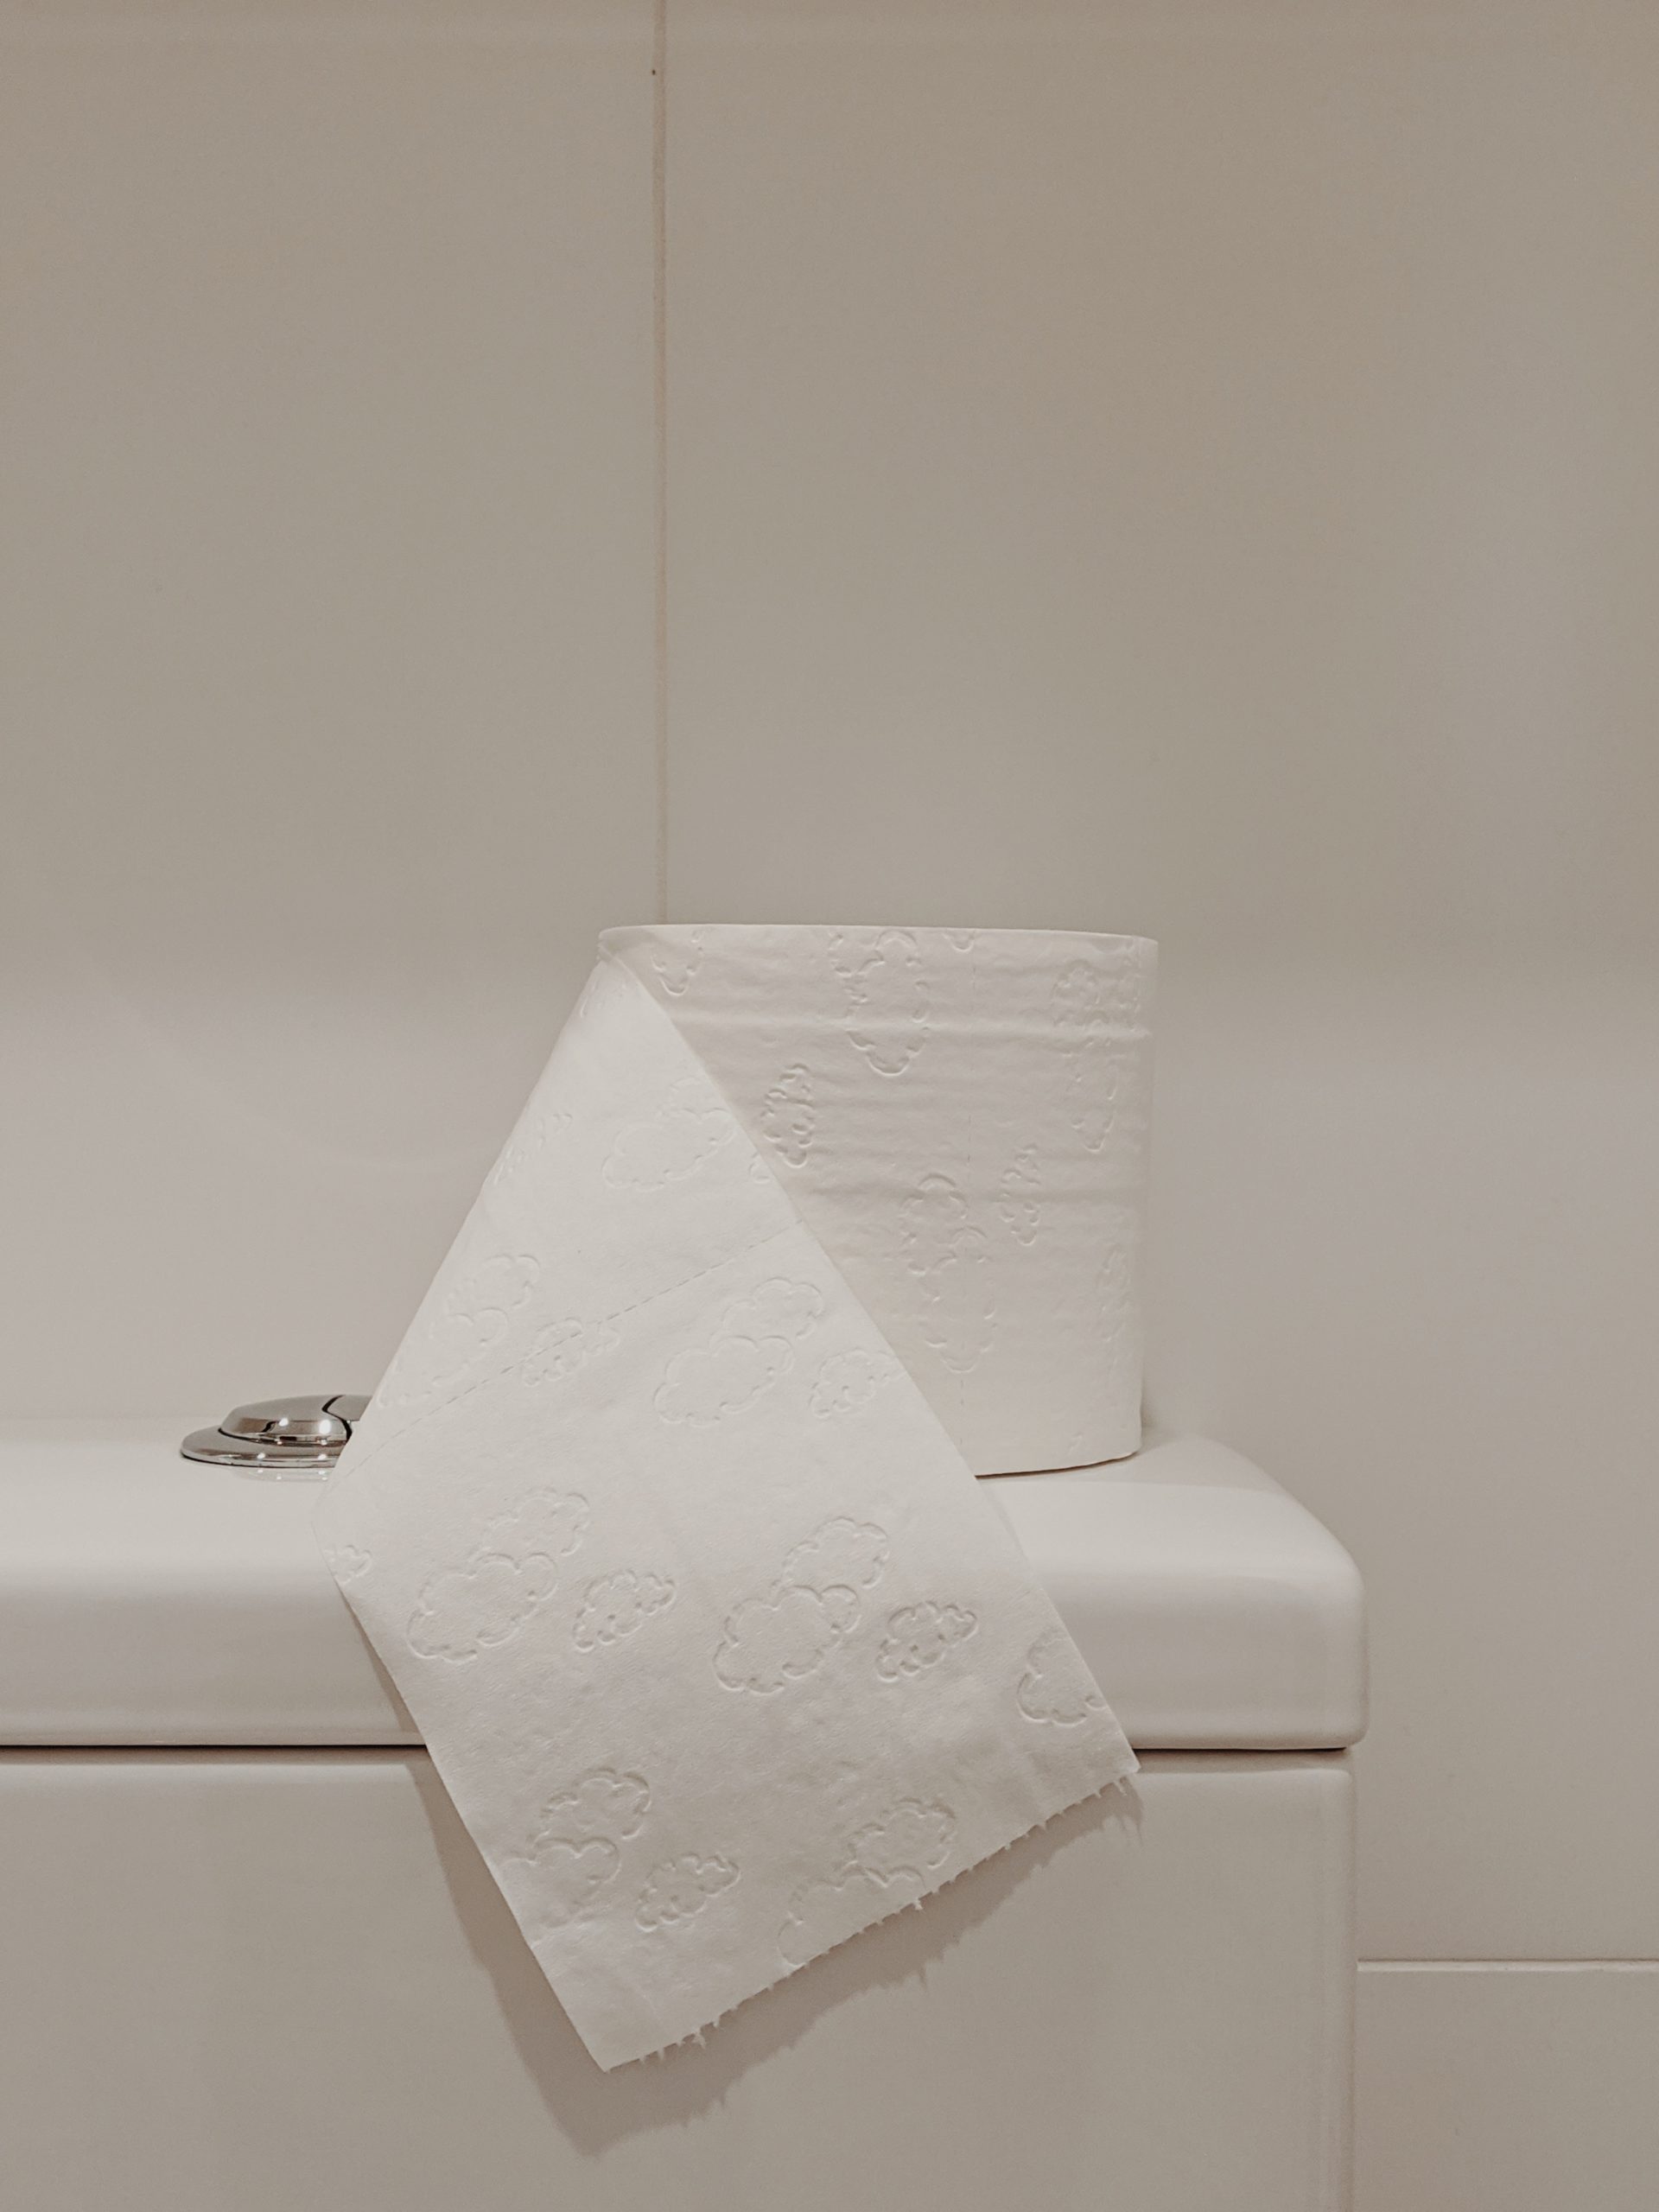 A roll of toilet paper sitting on top of the toilet